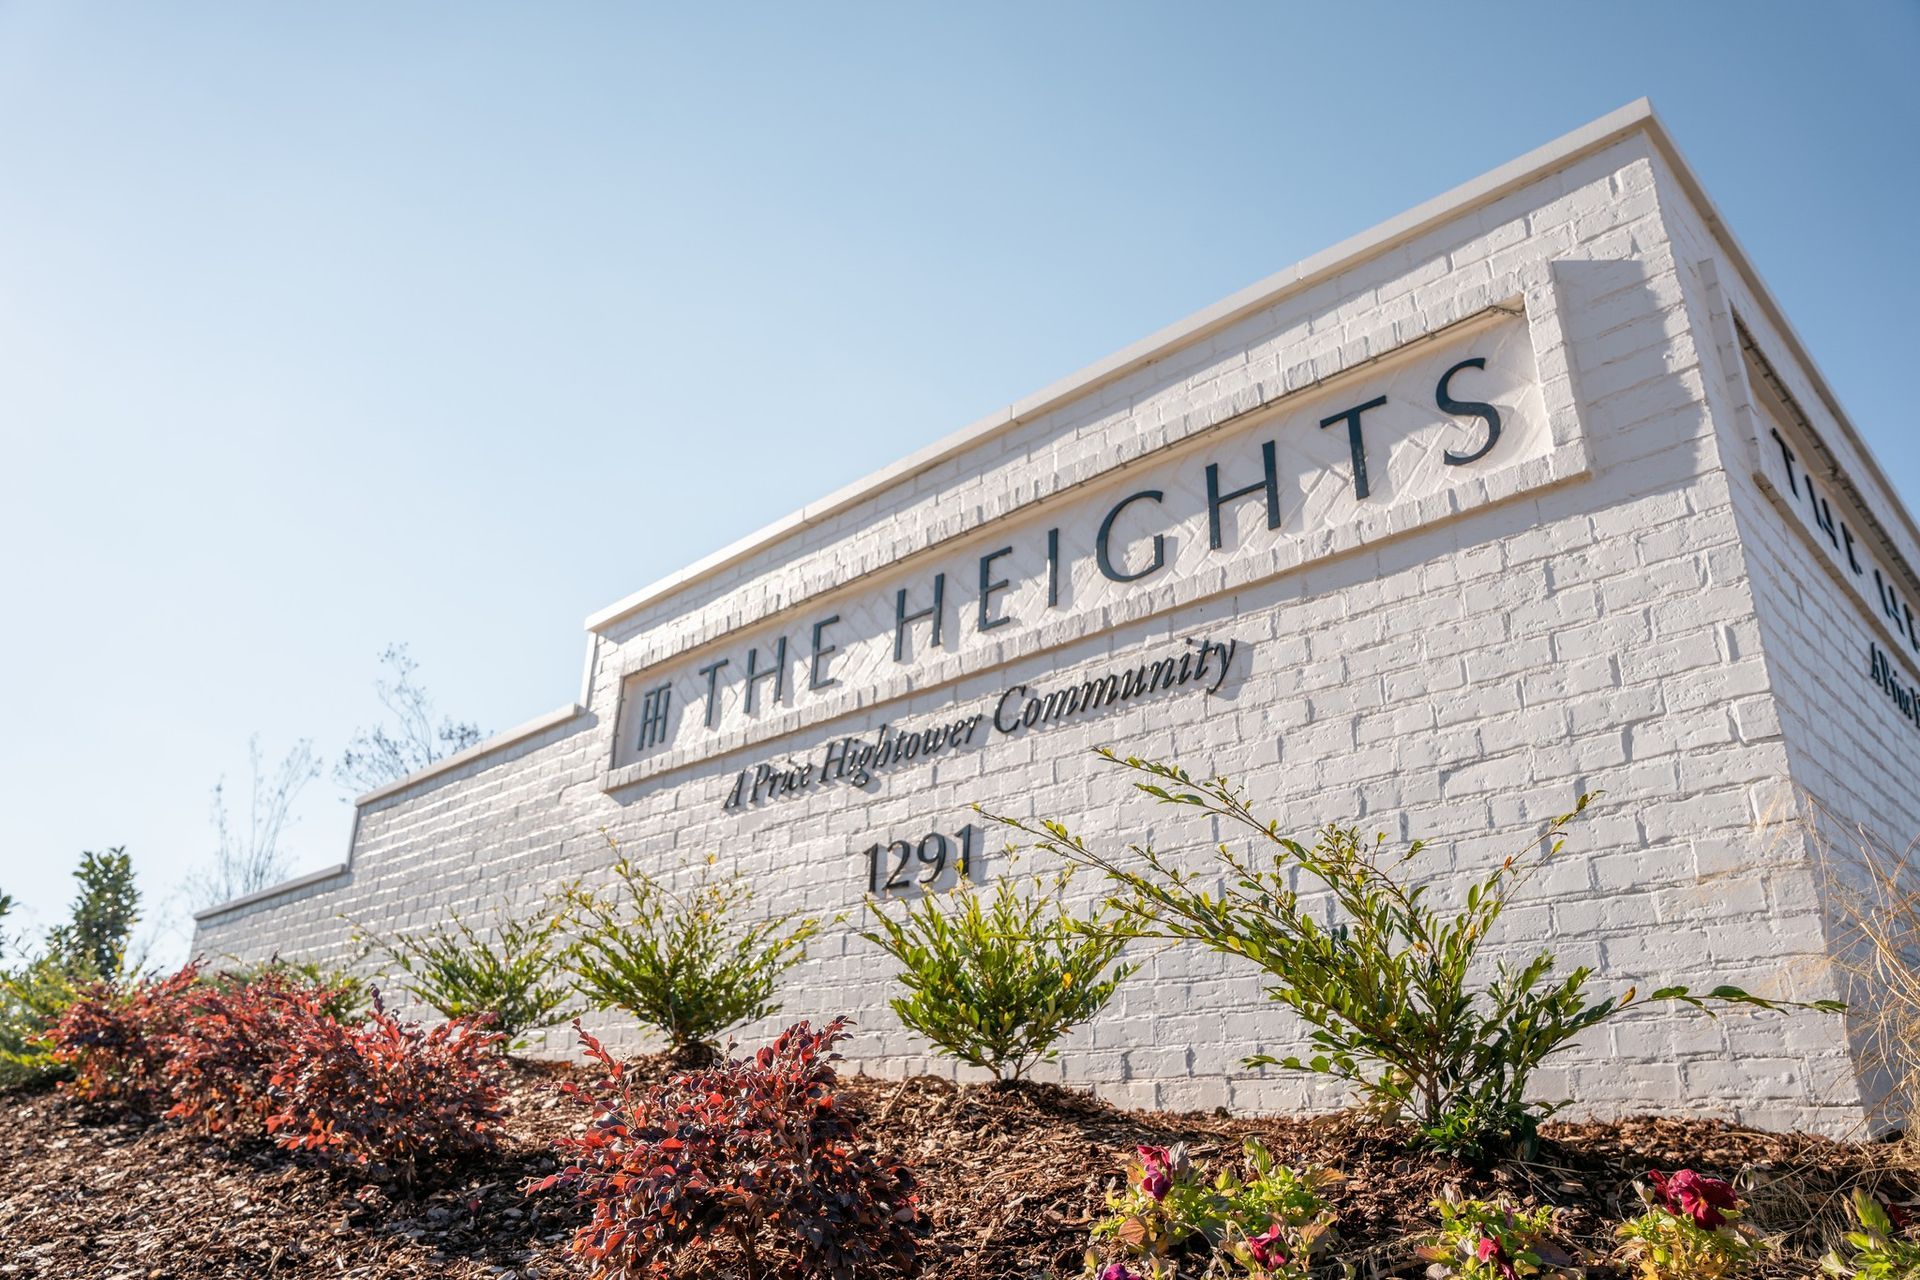 The Heights Community Entrance